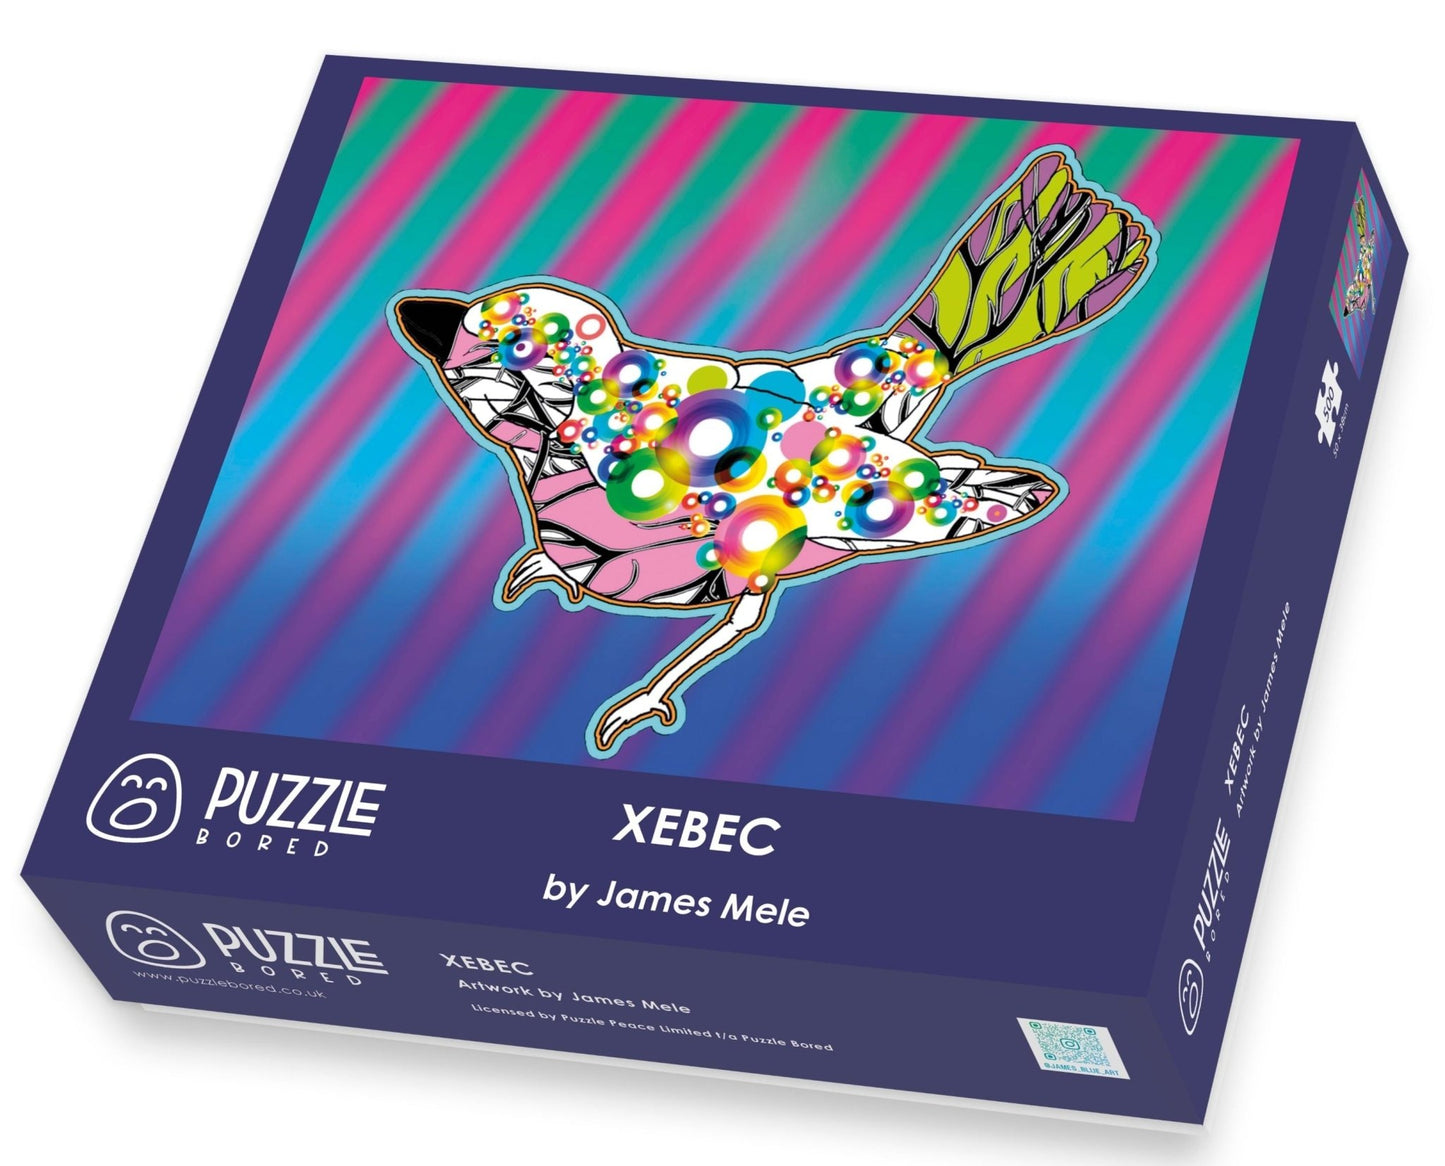 Xebec by James Mele - Puzzle Bored